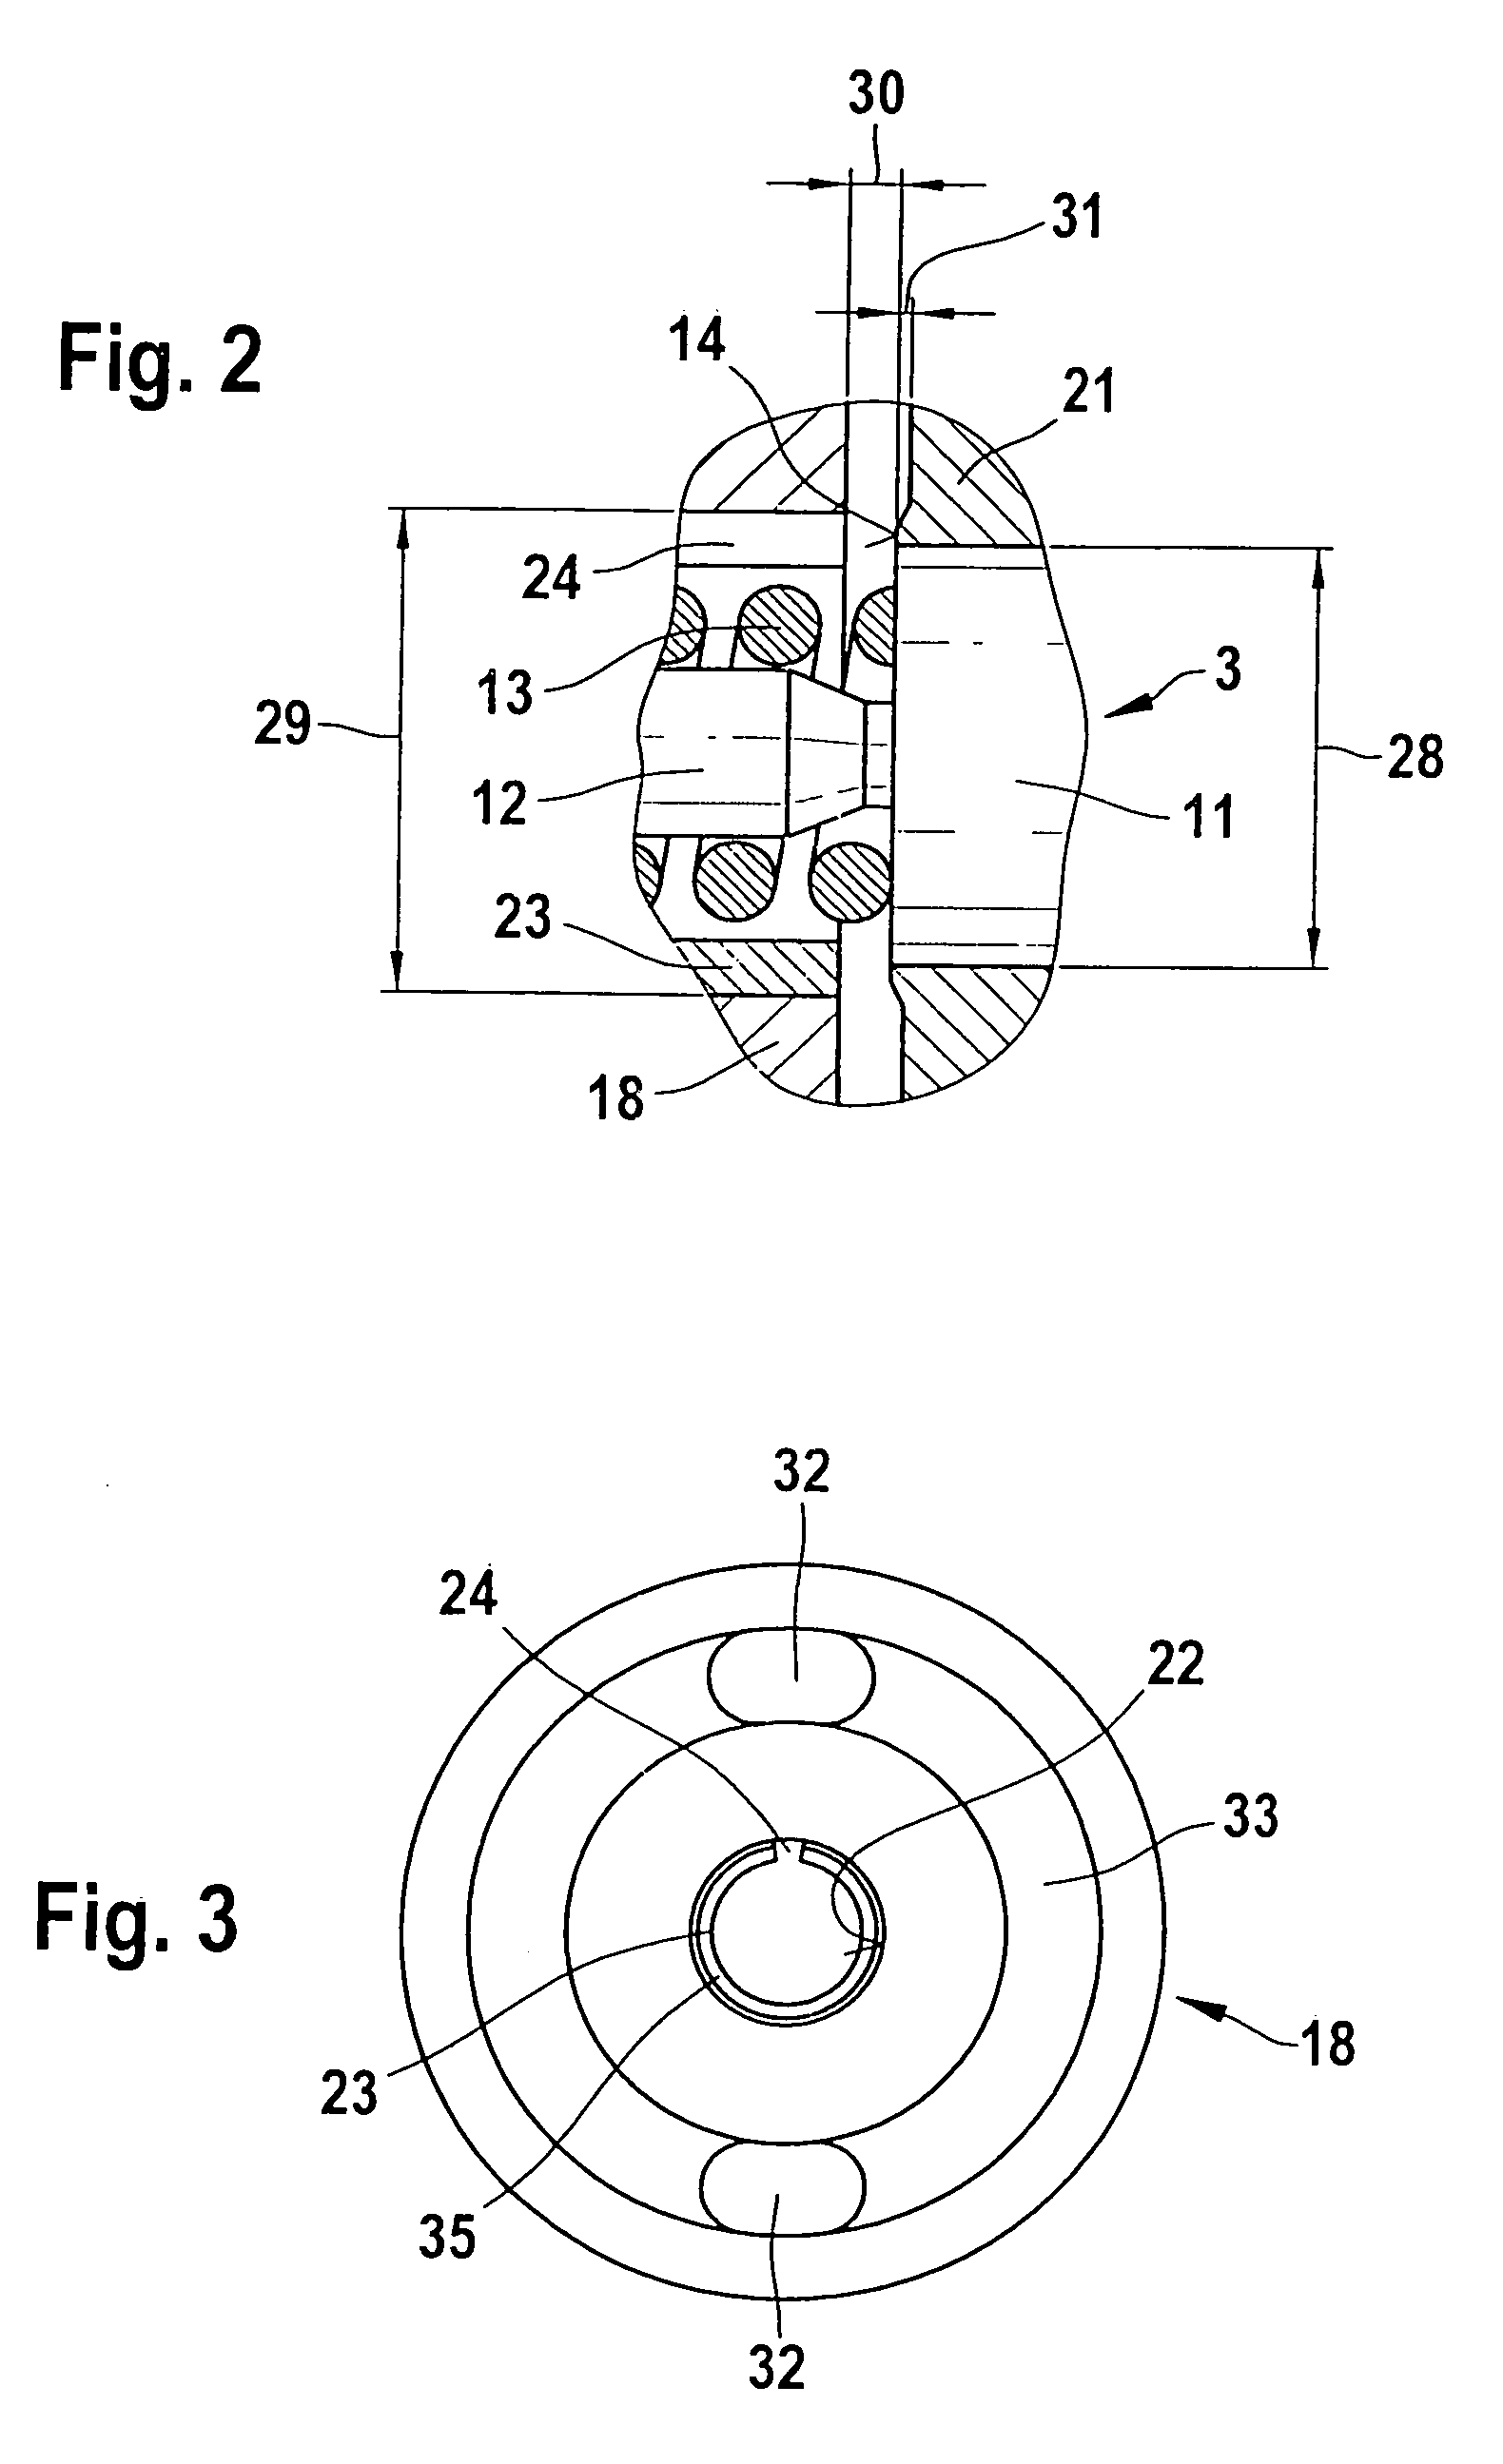 Fuel injector with clamping sleeve as a stop for a valve needle